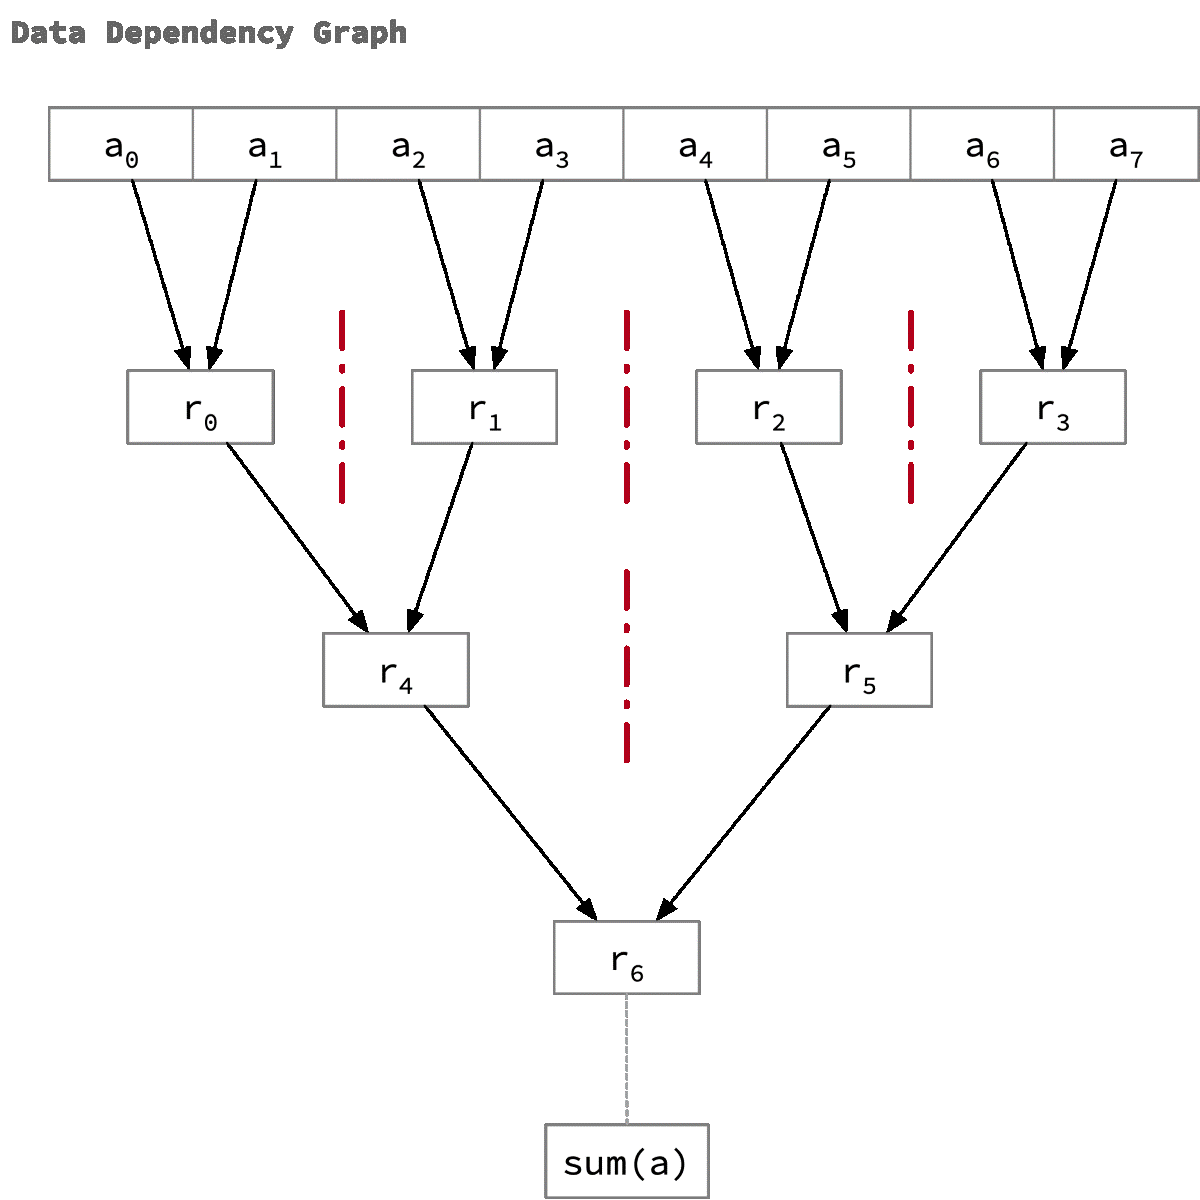 A program accepts an array and computes a scalar sum of the array elements. In this implementation, the algorithm produces an intermediate result by adding consecutive elements of the input array. This process is repeated until the result array has only one element.